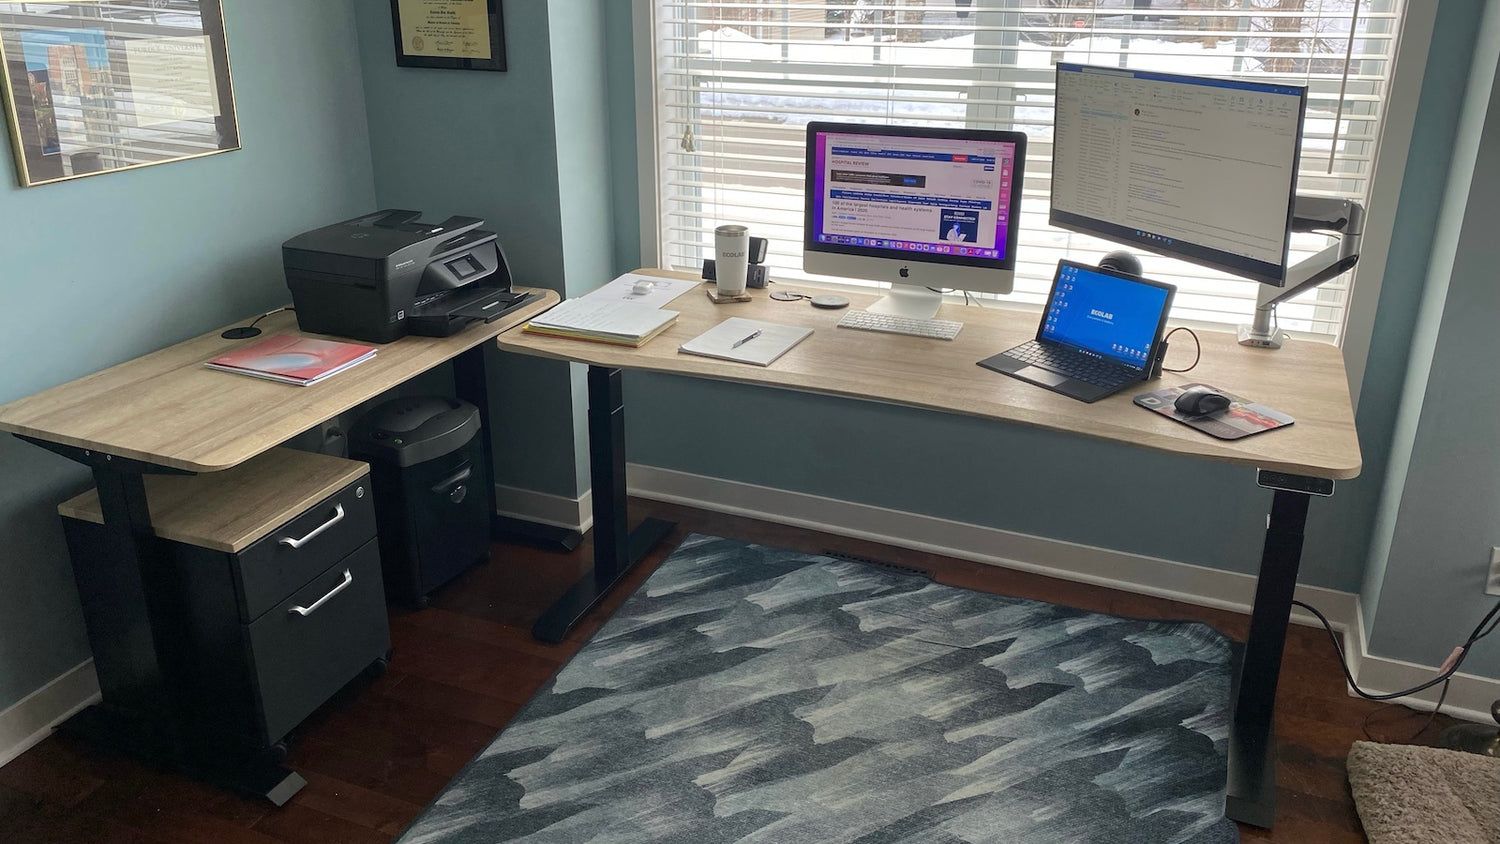 standing desk mobile cabinet and side table with printer, 2 screens, laptop, shreder and rug